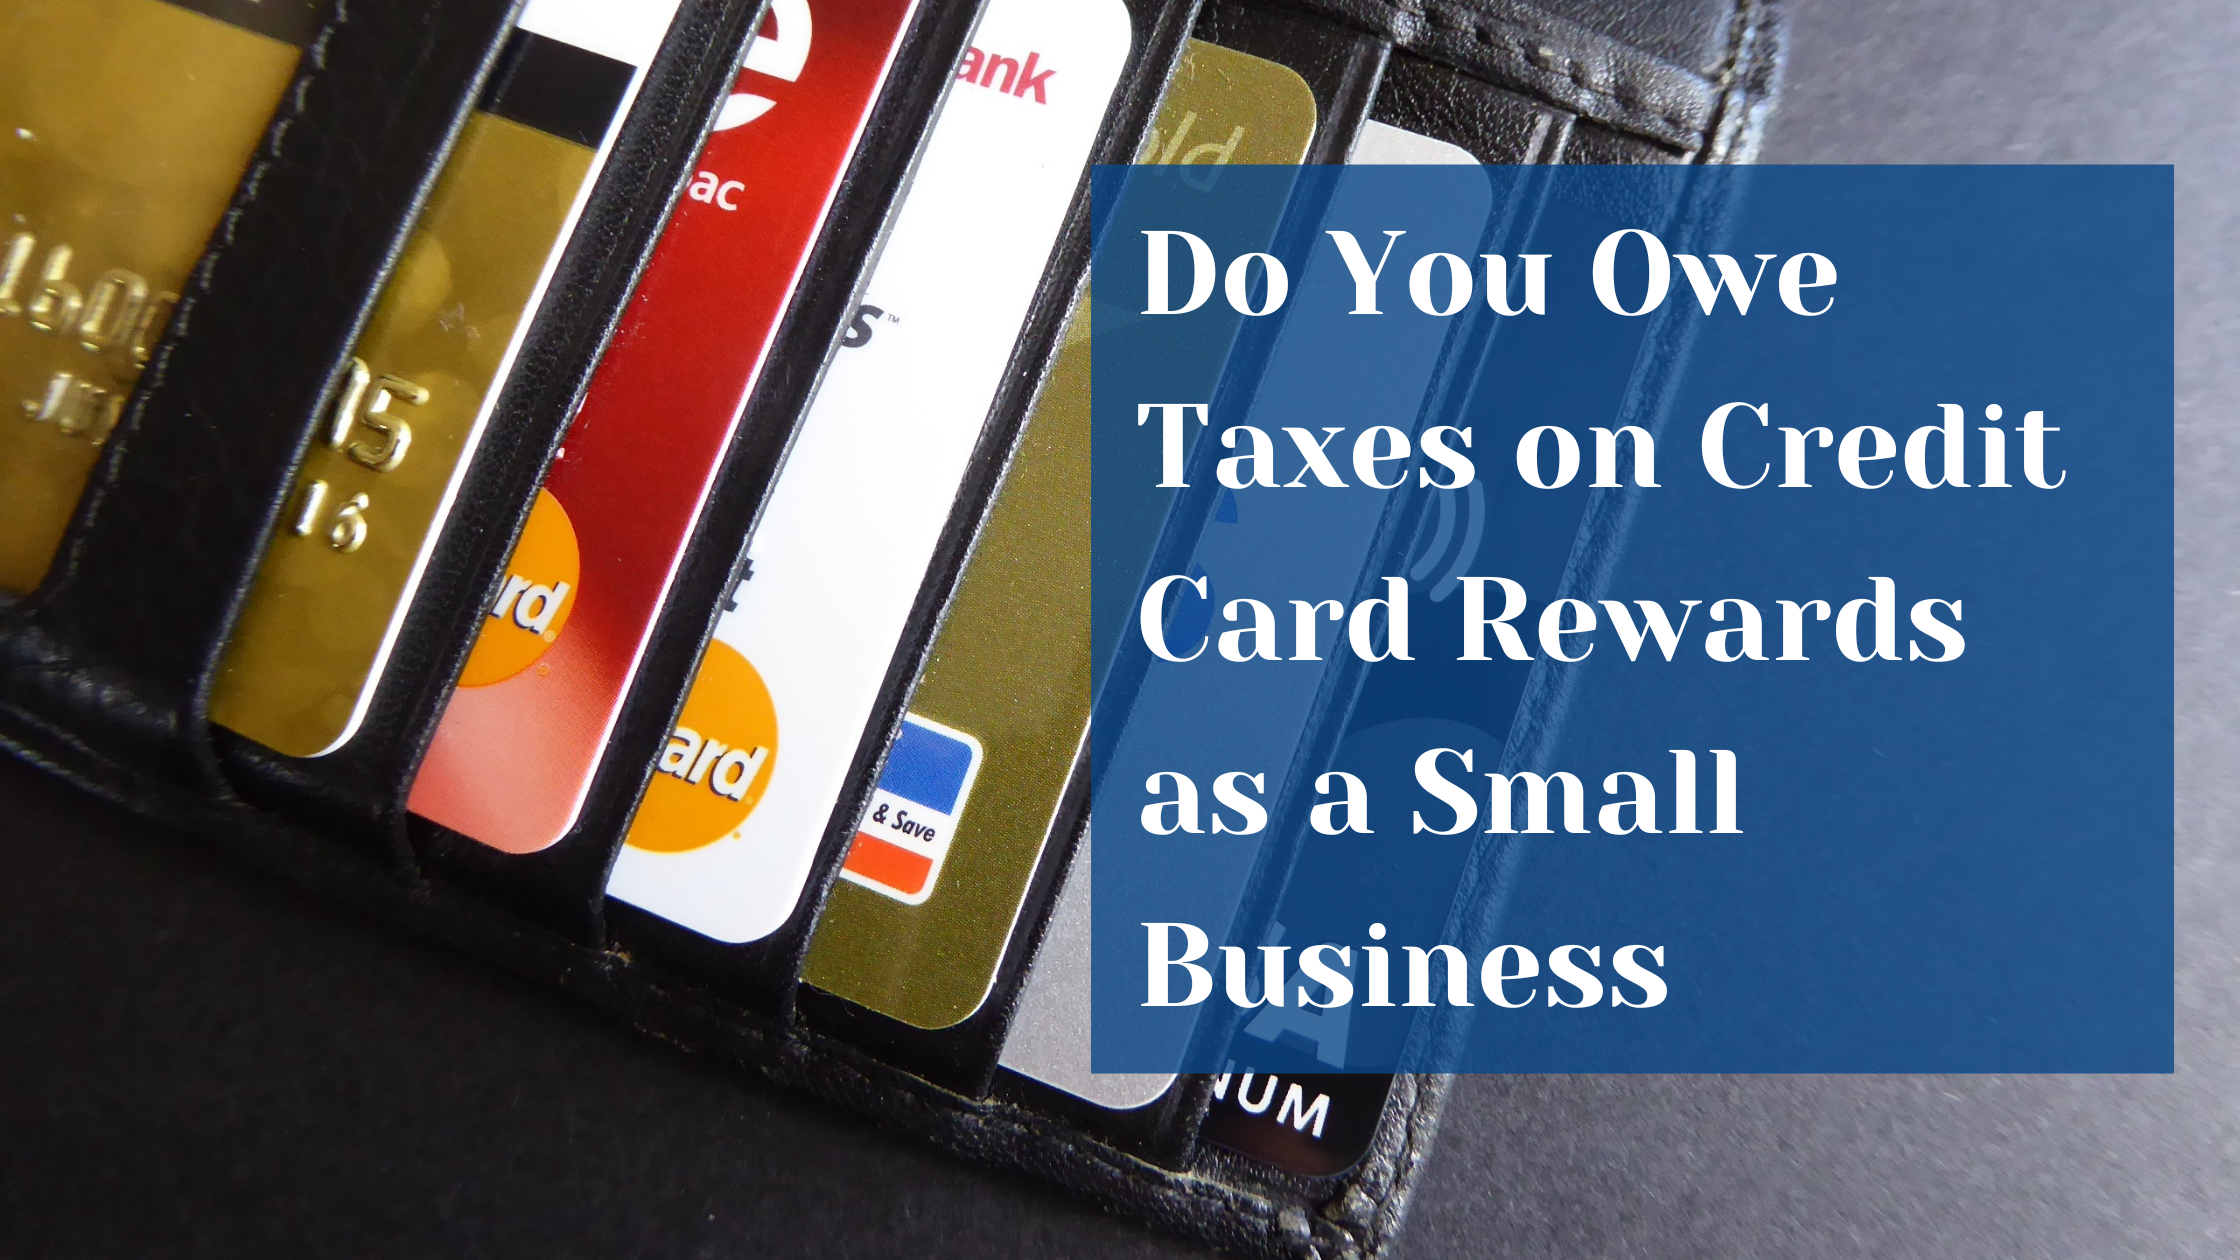 Do You Owe Taxes on Credit Card Rewards as a Small Business